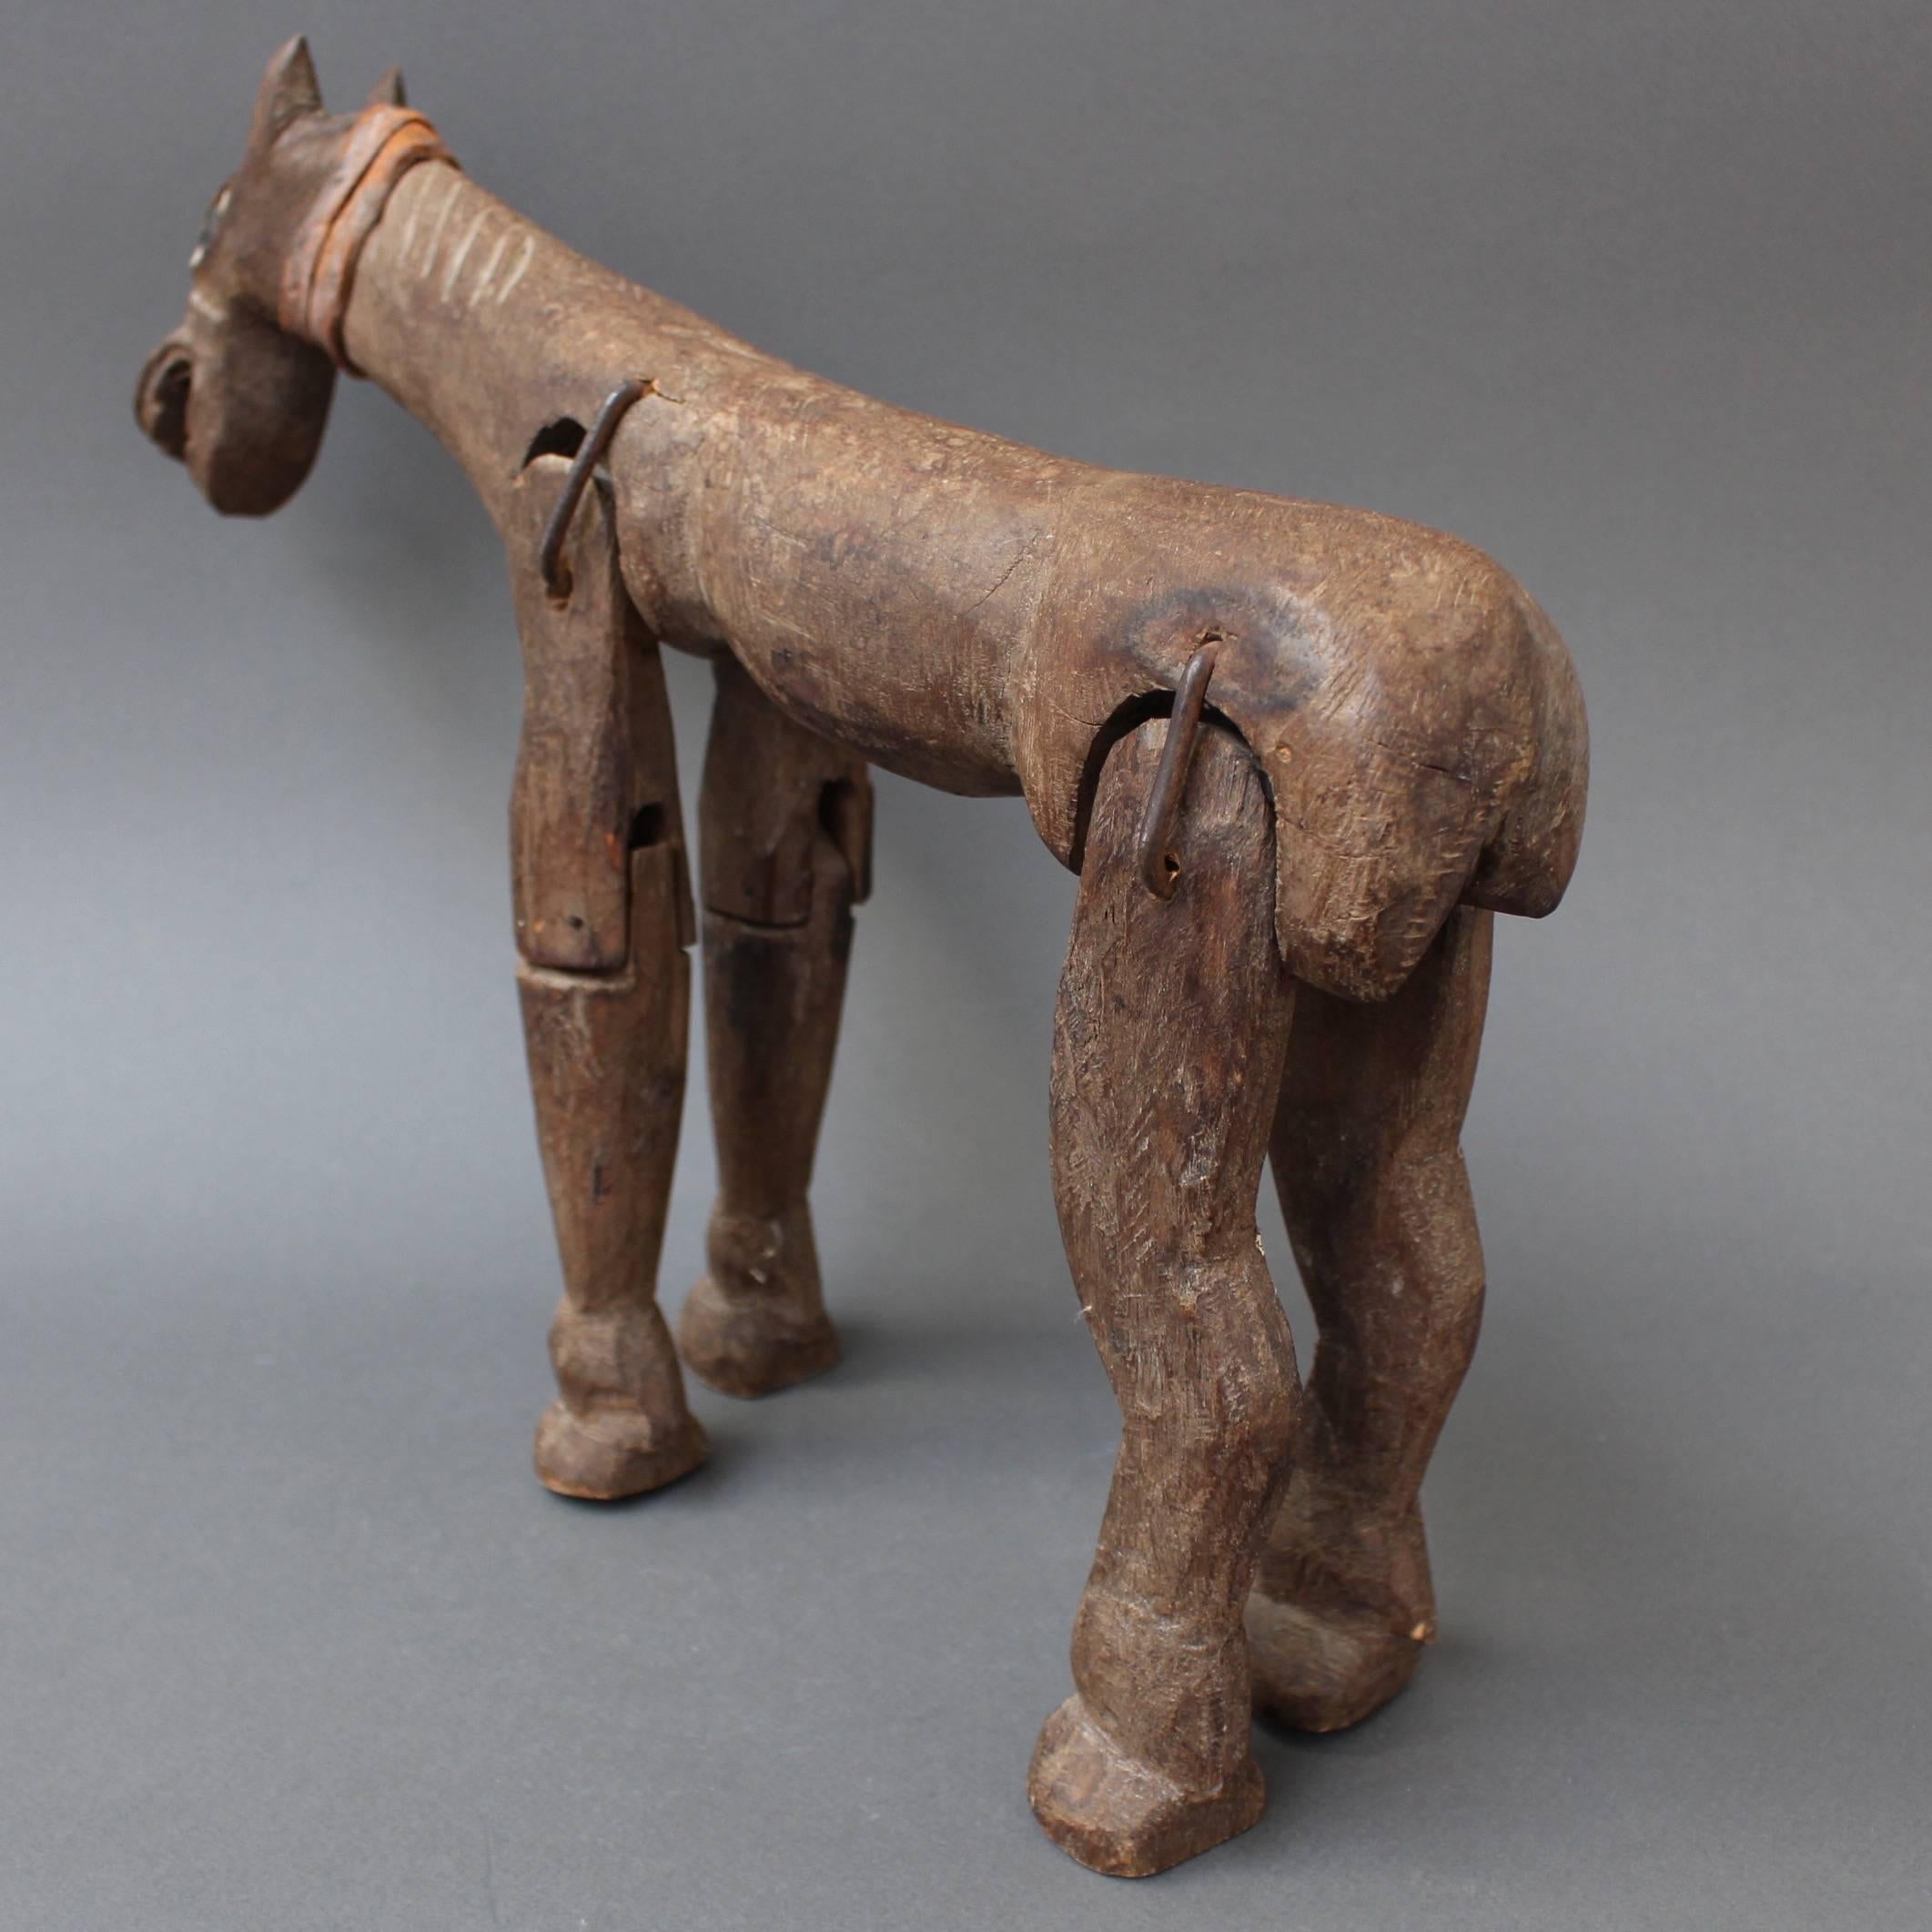 Hand-Carved Antique Carved Wooden Horse Marionette, 19th Century